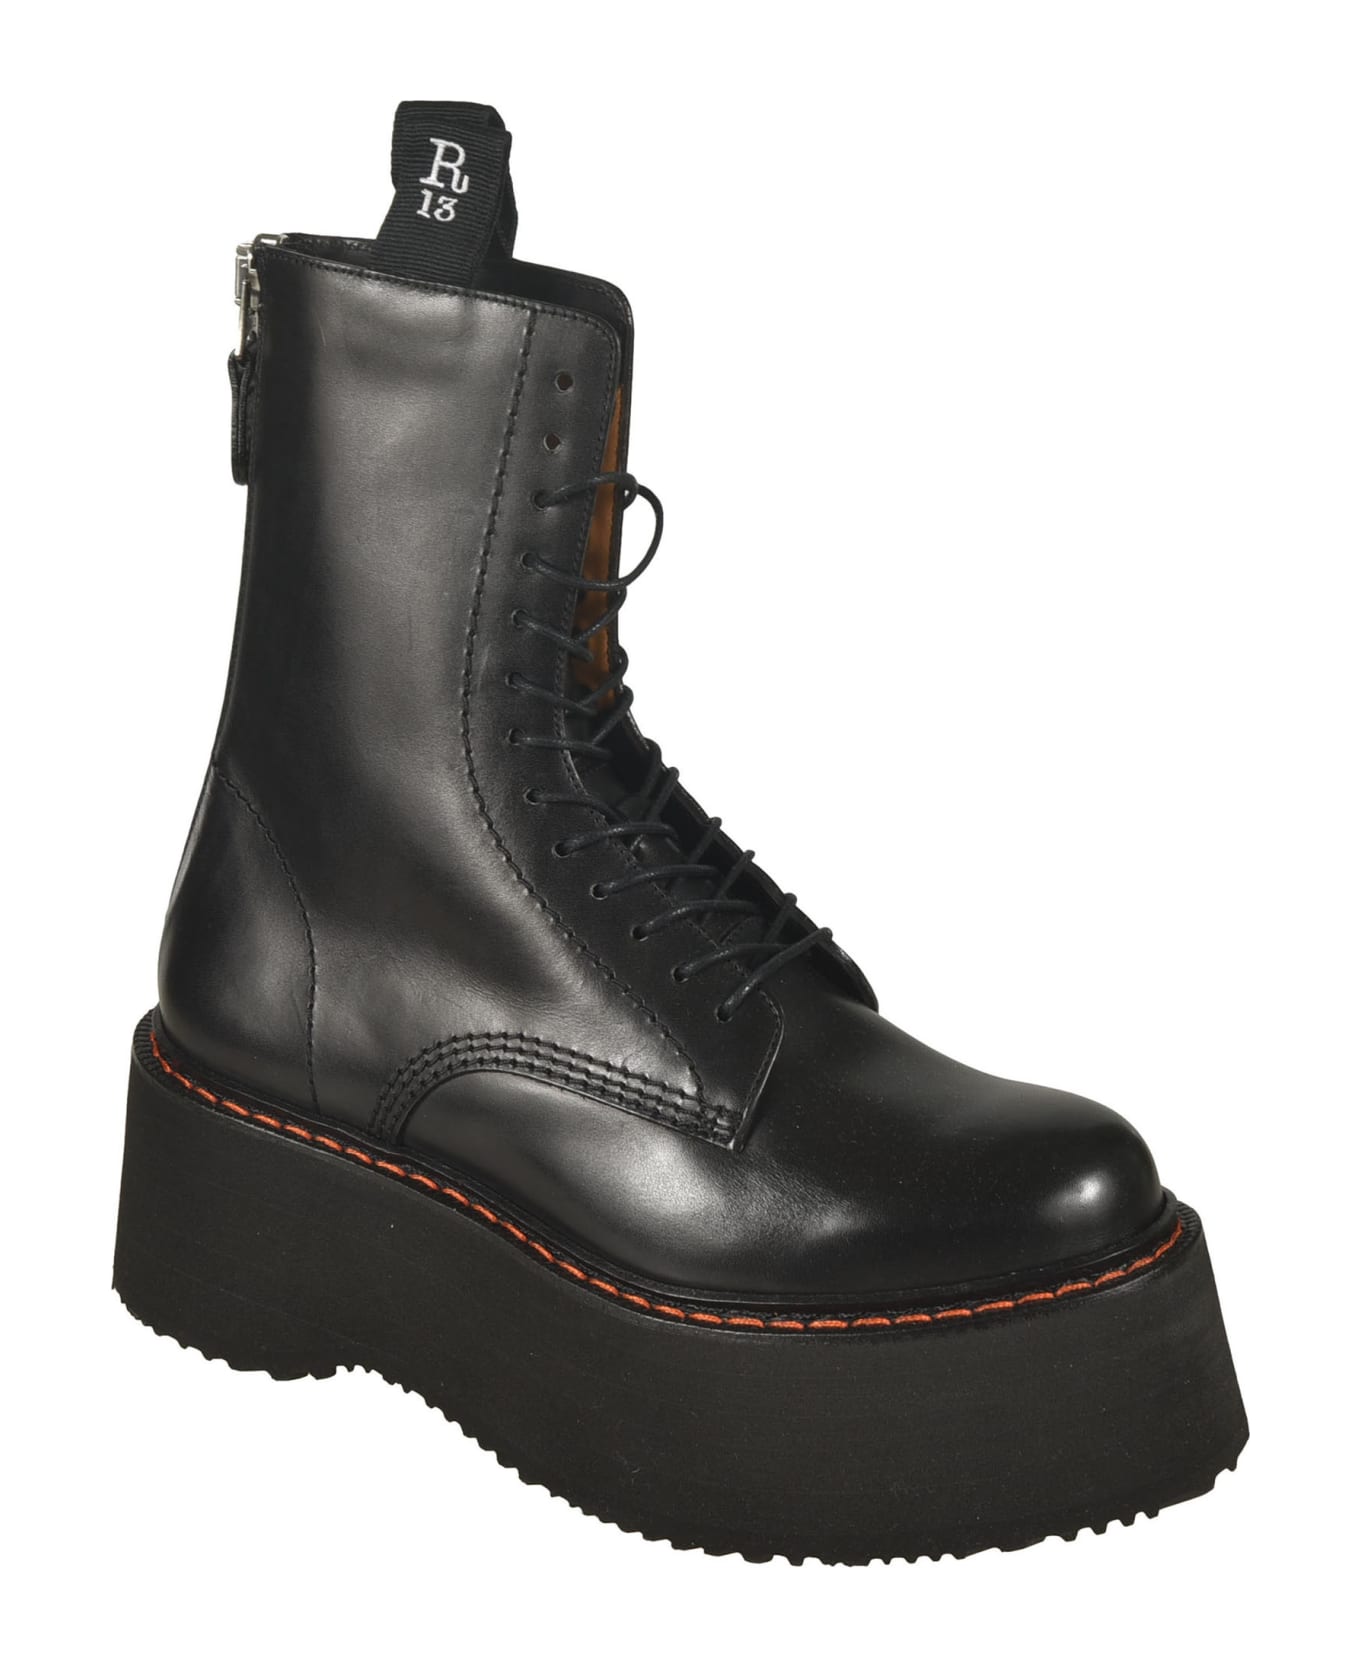 R13 X-stack Boots - Black